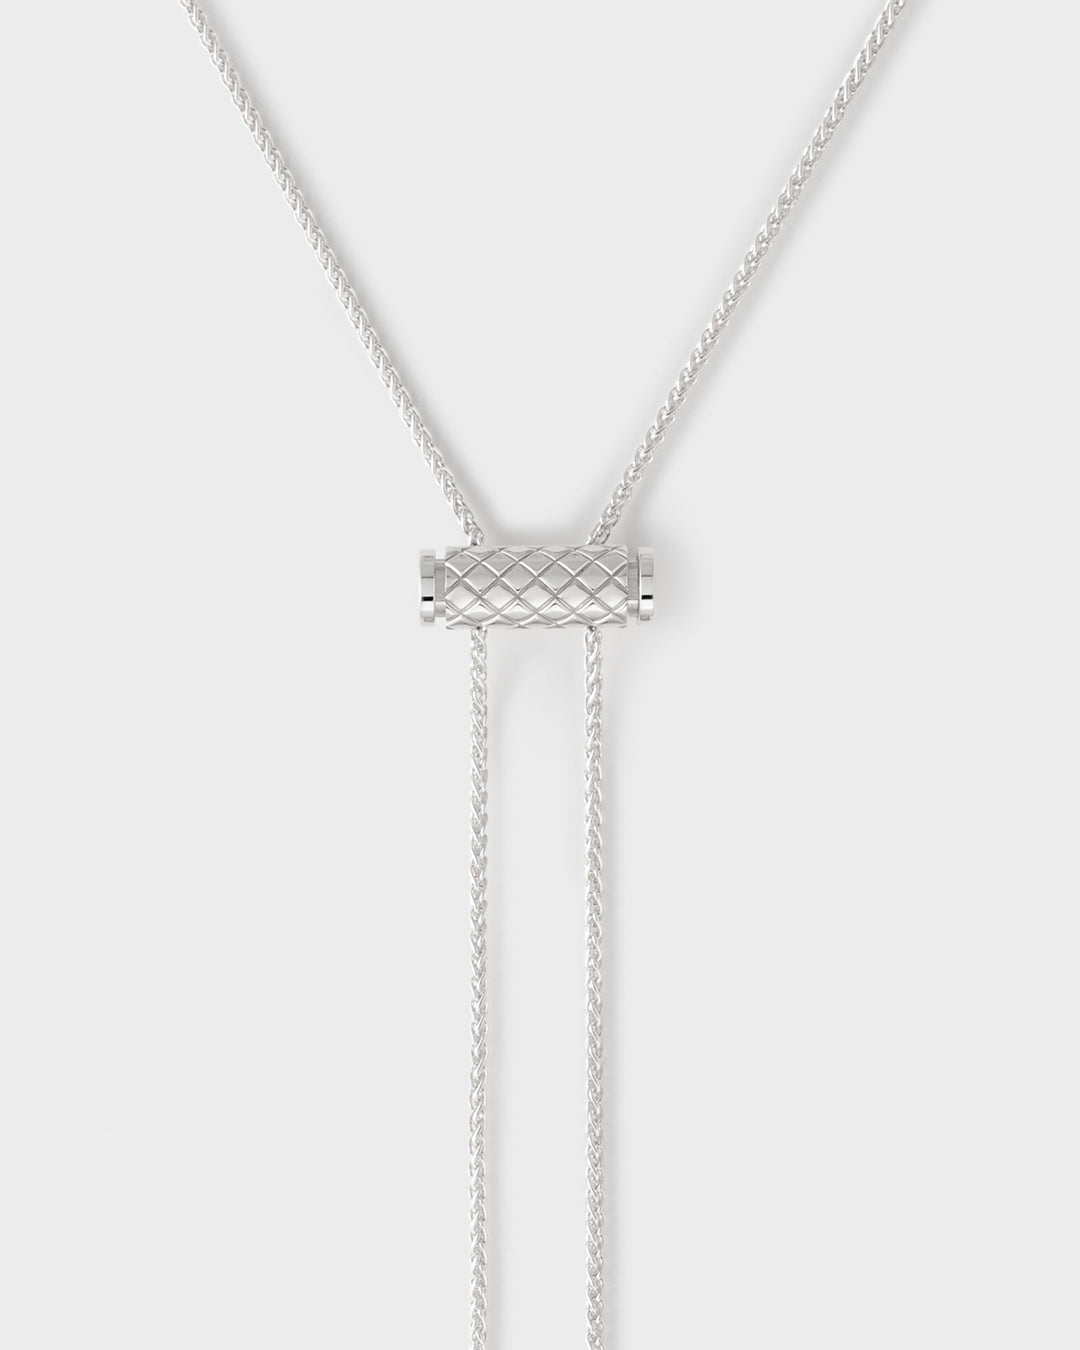 Gold Latch Pendant on GM Chain in White Gold - 1 - Nouvel Heritage